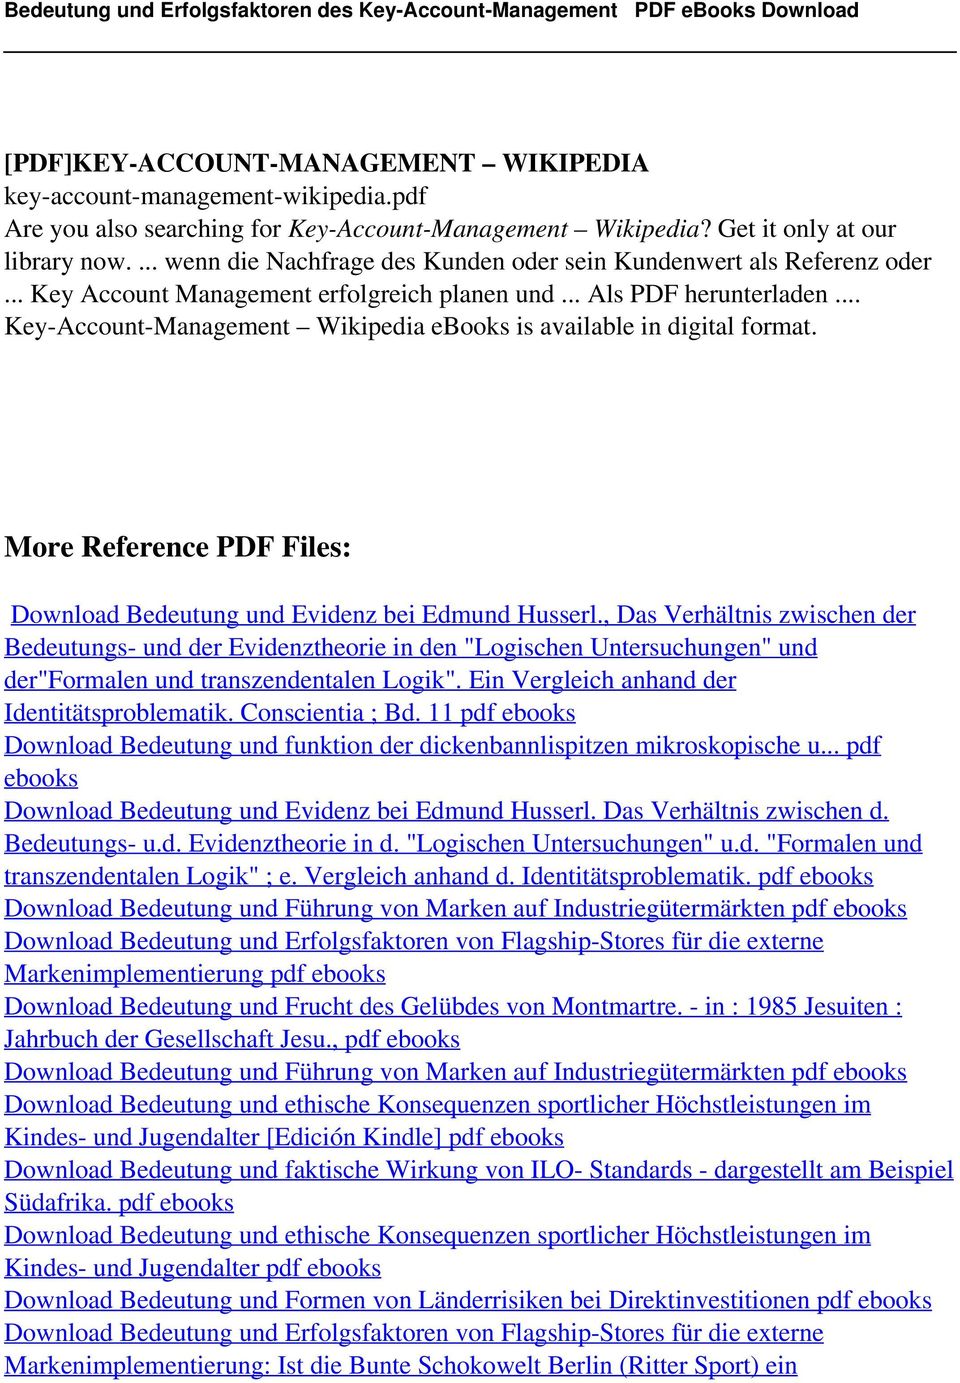 .. Key-Account-Management Wikipedia ebooks is More Reference PDF Files: Download Bedeutung und Evidenz bei Edmund Husserl.